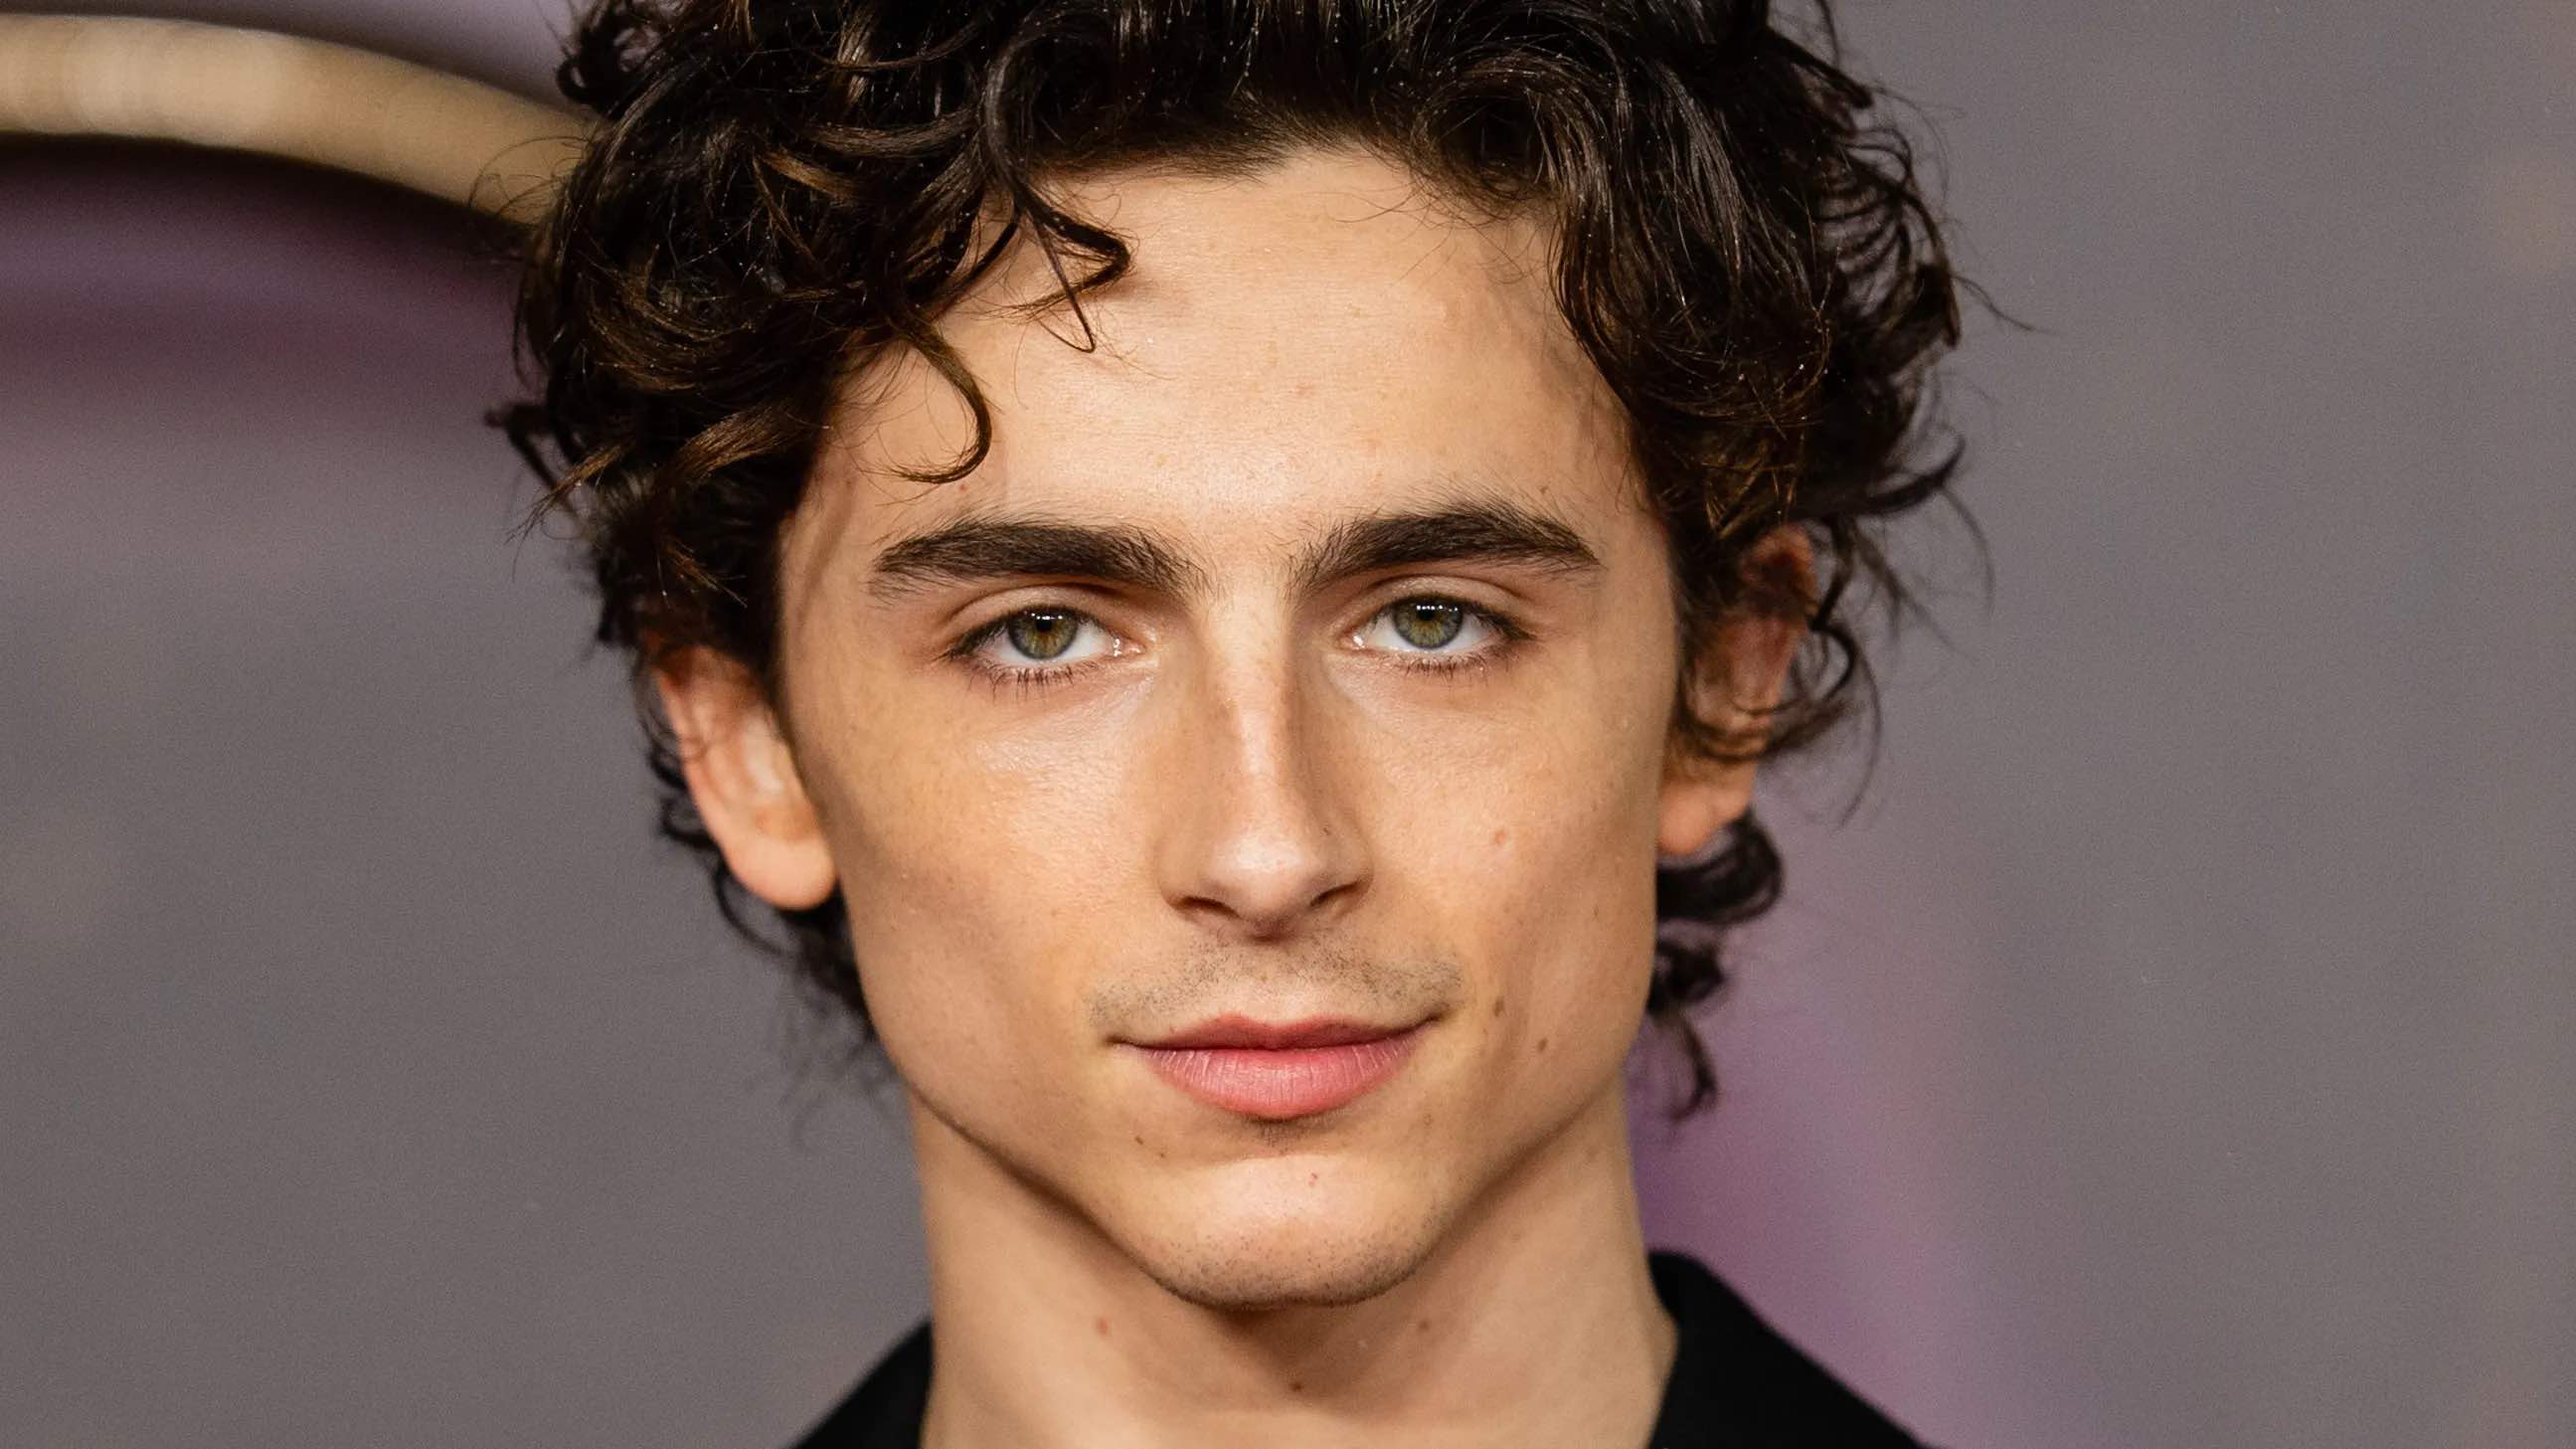 The height of scandal: Timothée Chalamet is dating Kylie Jenner ...